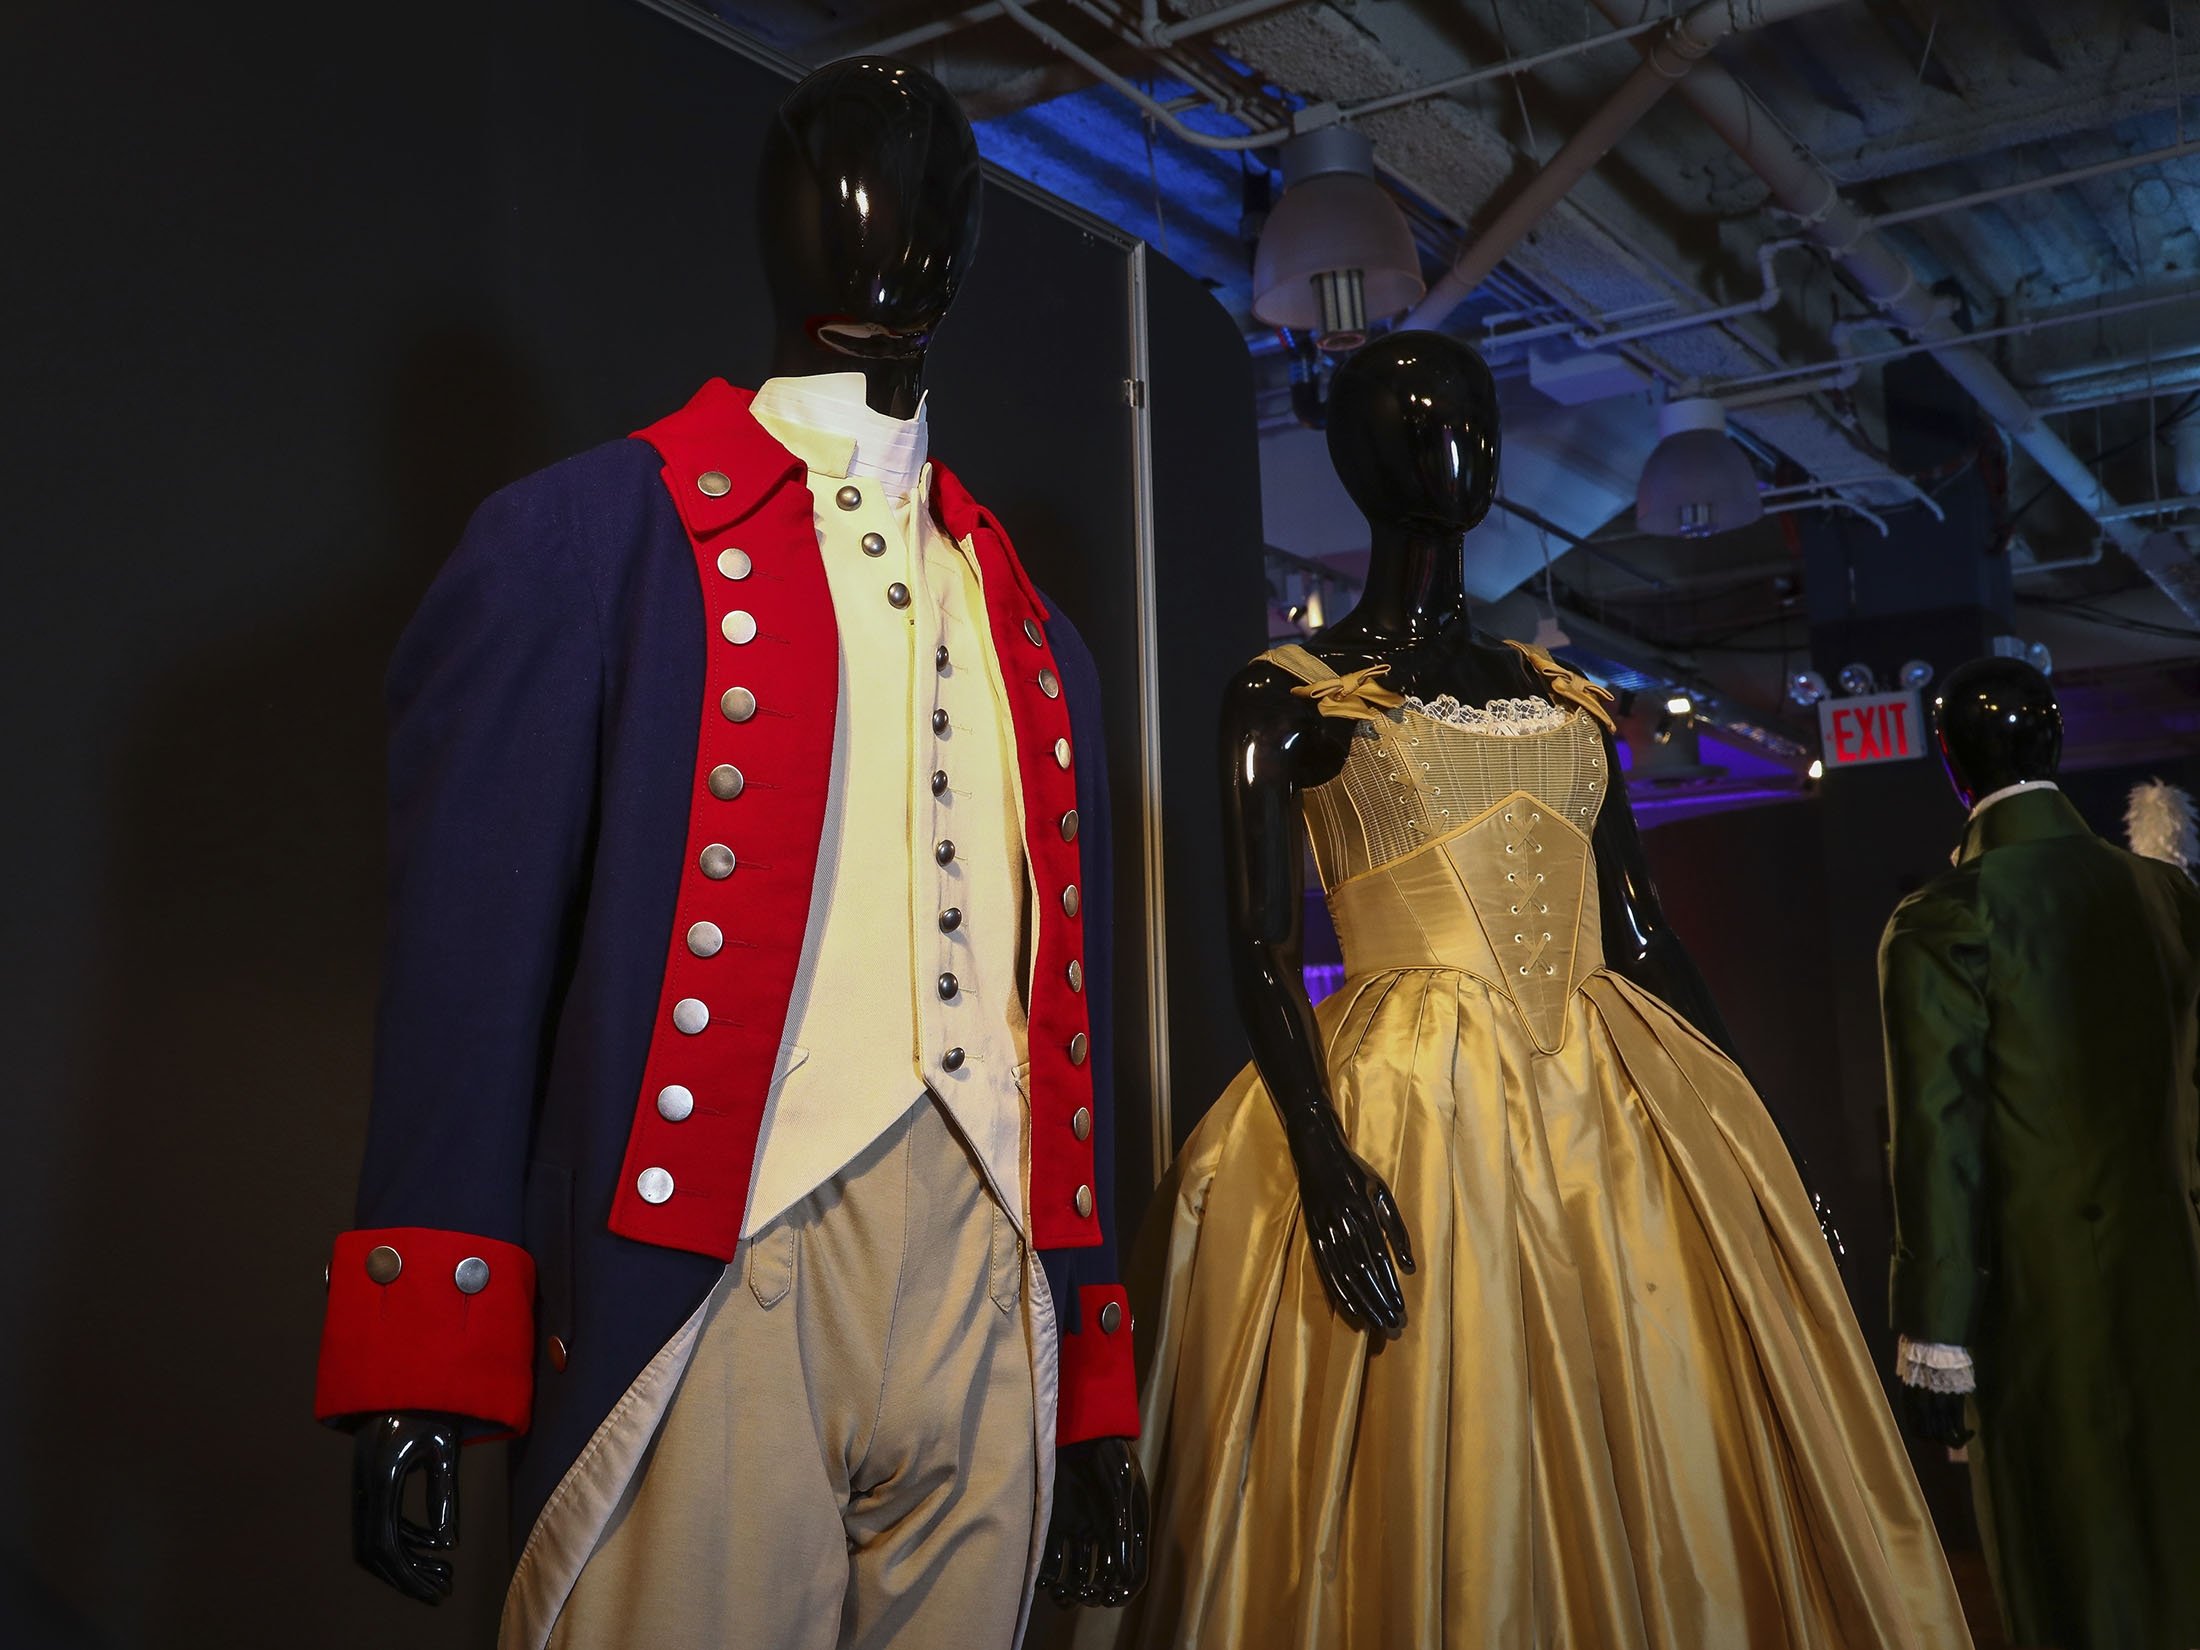 Costumes from the Broadway musical "Hamilton" are displayed at the "Showstoppers! Spectacular Costumes from Stage & Screen" exhibit in Times Square, New York, U.S., Aug. 2, 2021. (AP Photo)